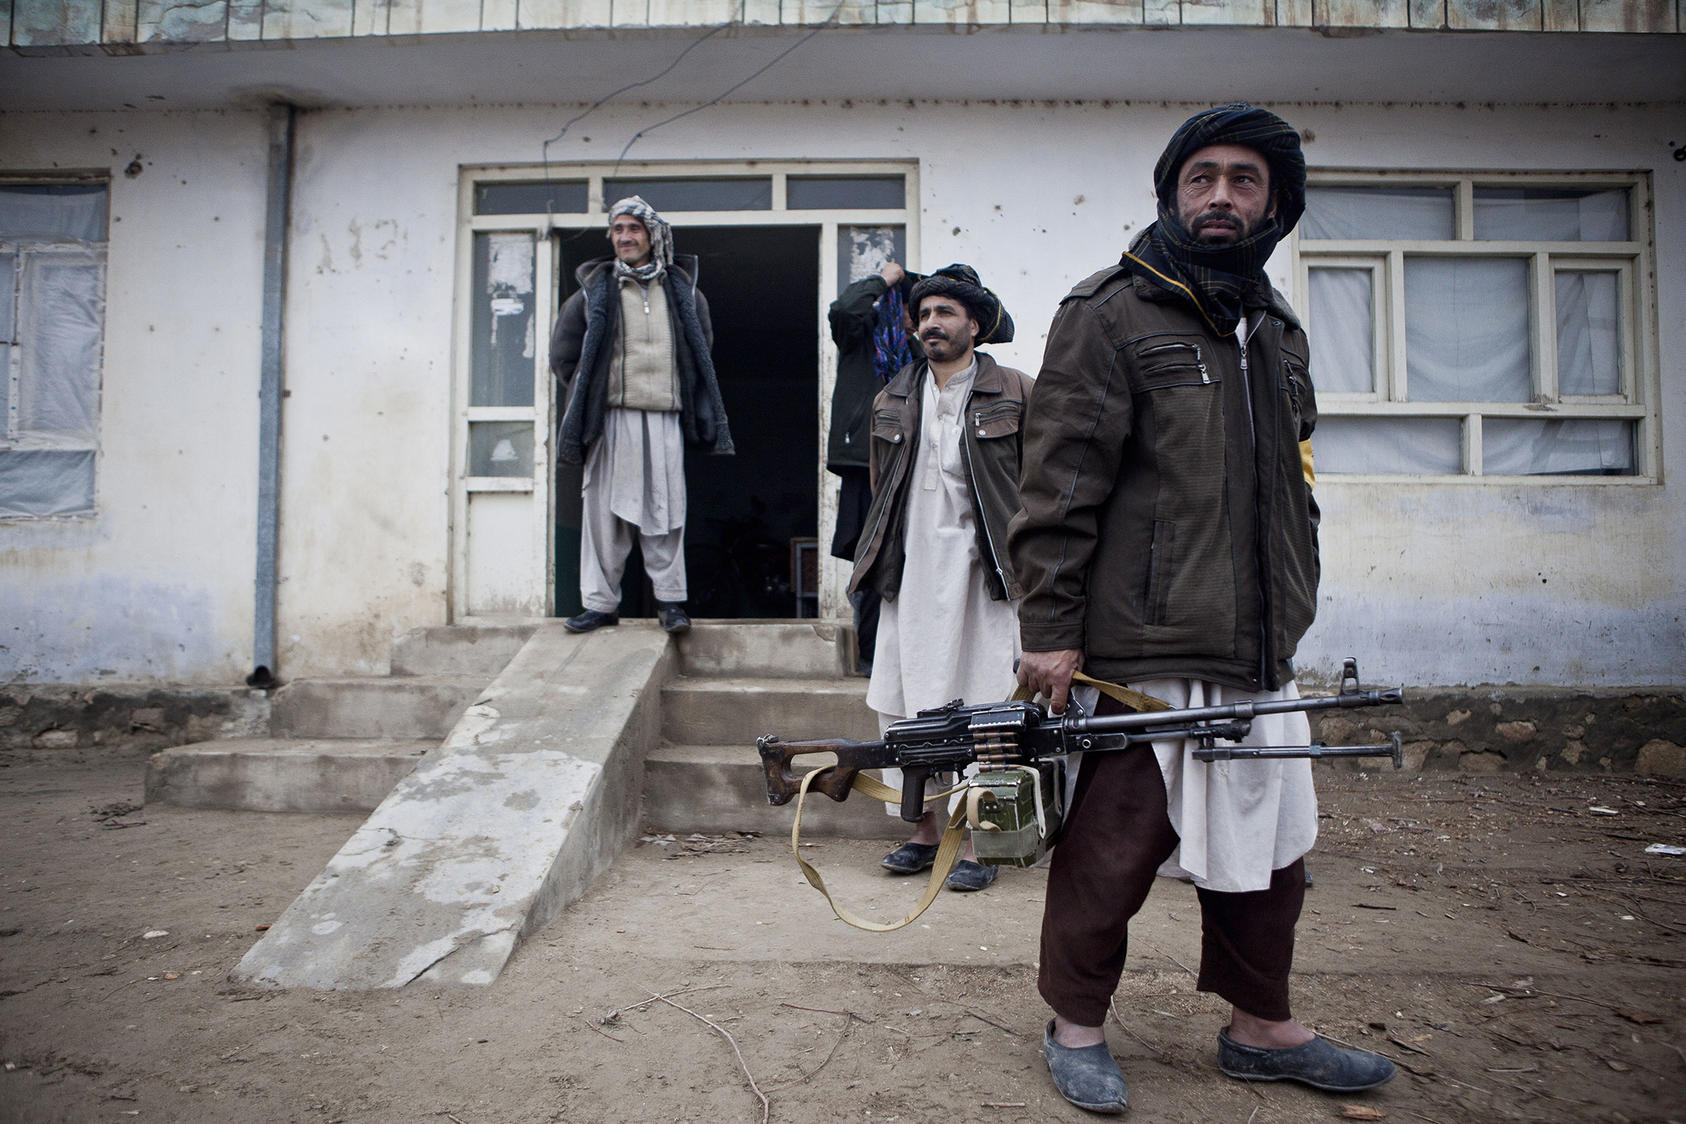 Men from one of Afghanistan’s many militia forces carry a machine gun on patrol in Balkh province. Years of war have made guns and combativeness more central to Afghan men’s ideas of masculinity—a hurdle to peacemaking. (Bryan Denton/The New York Times)